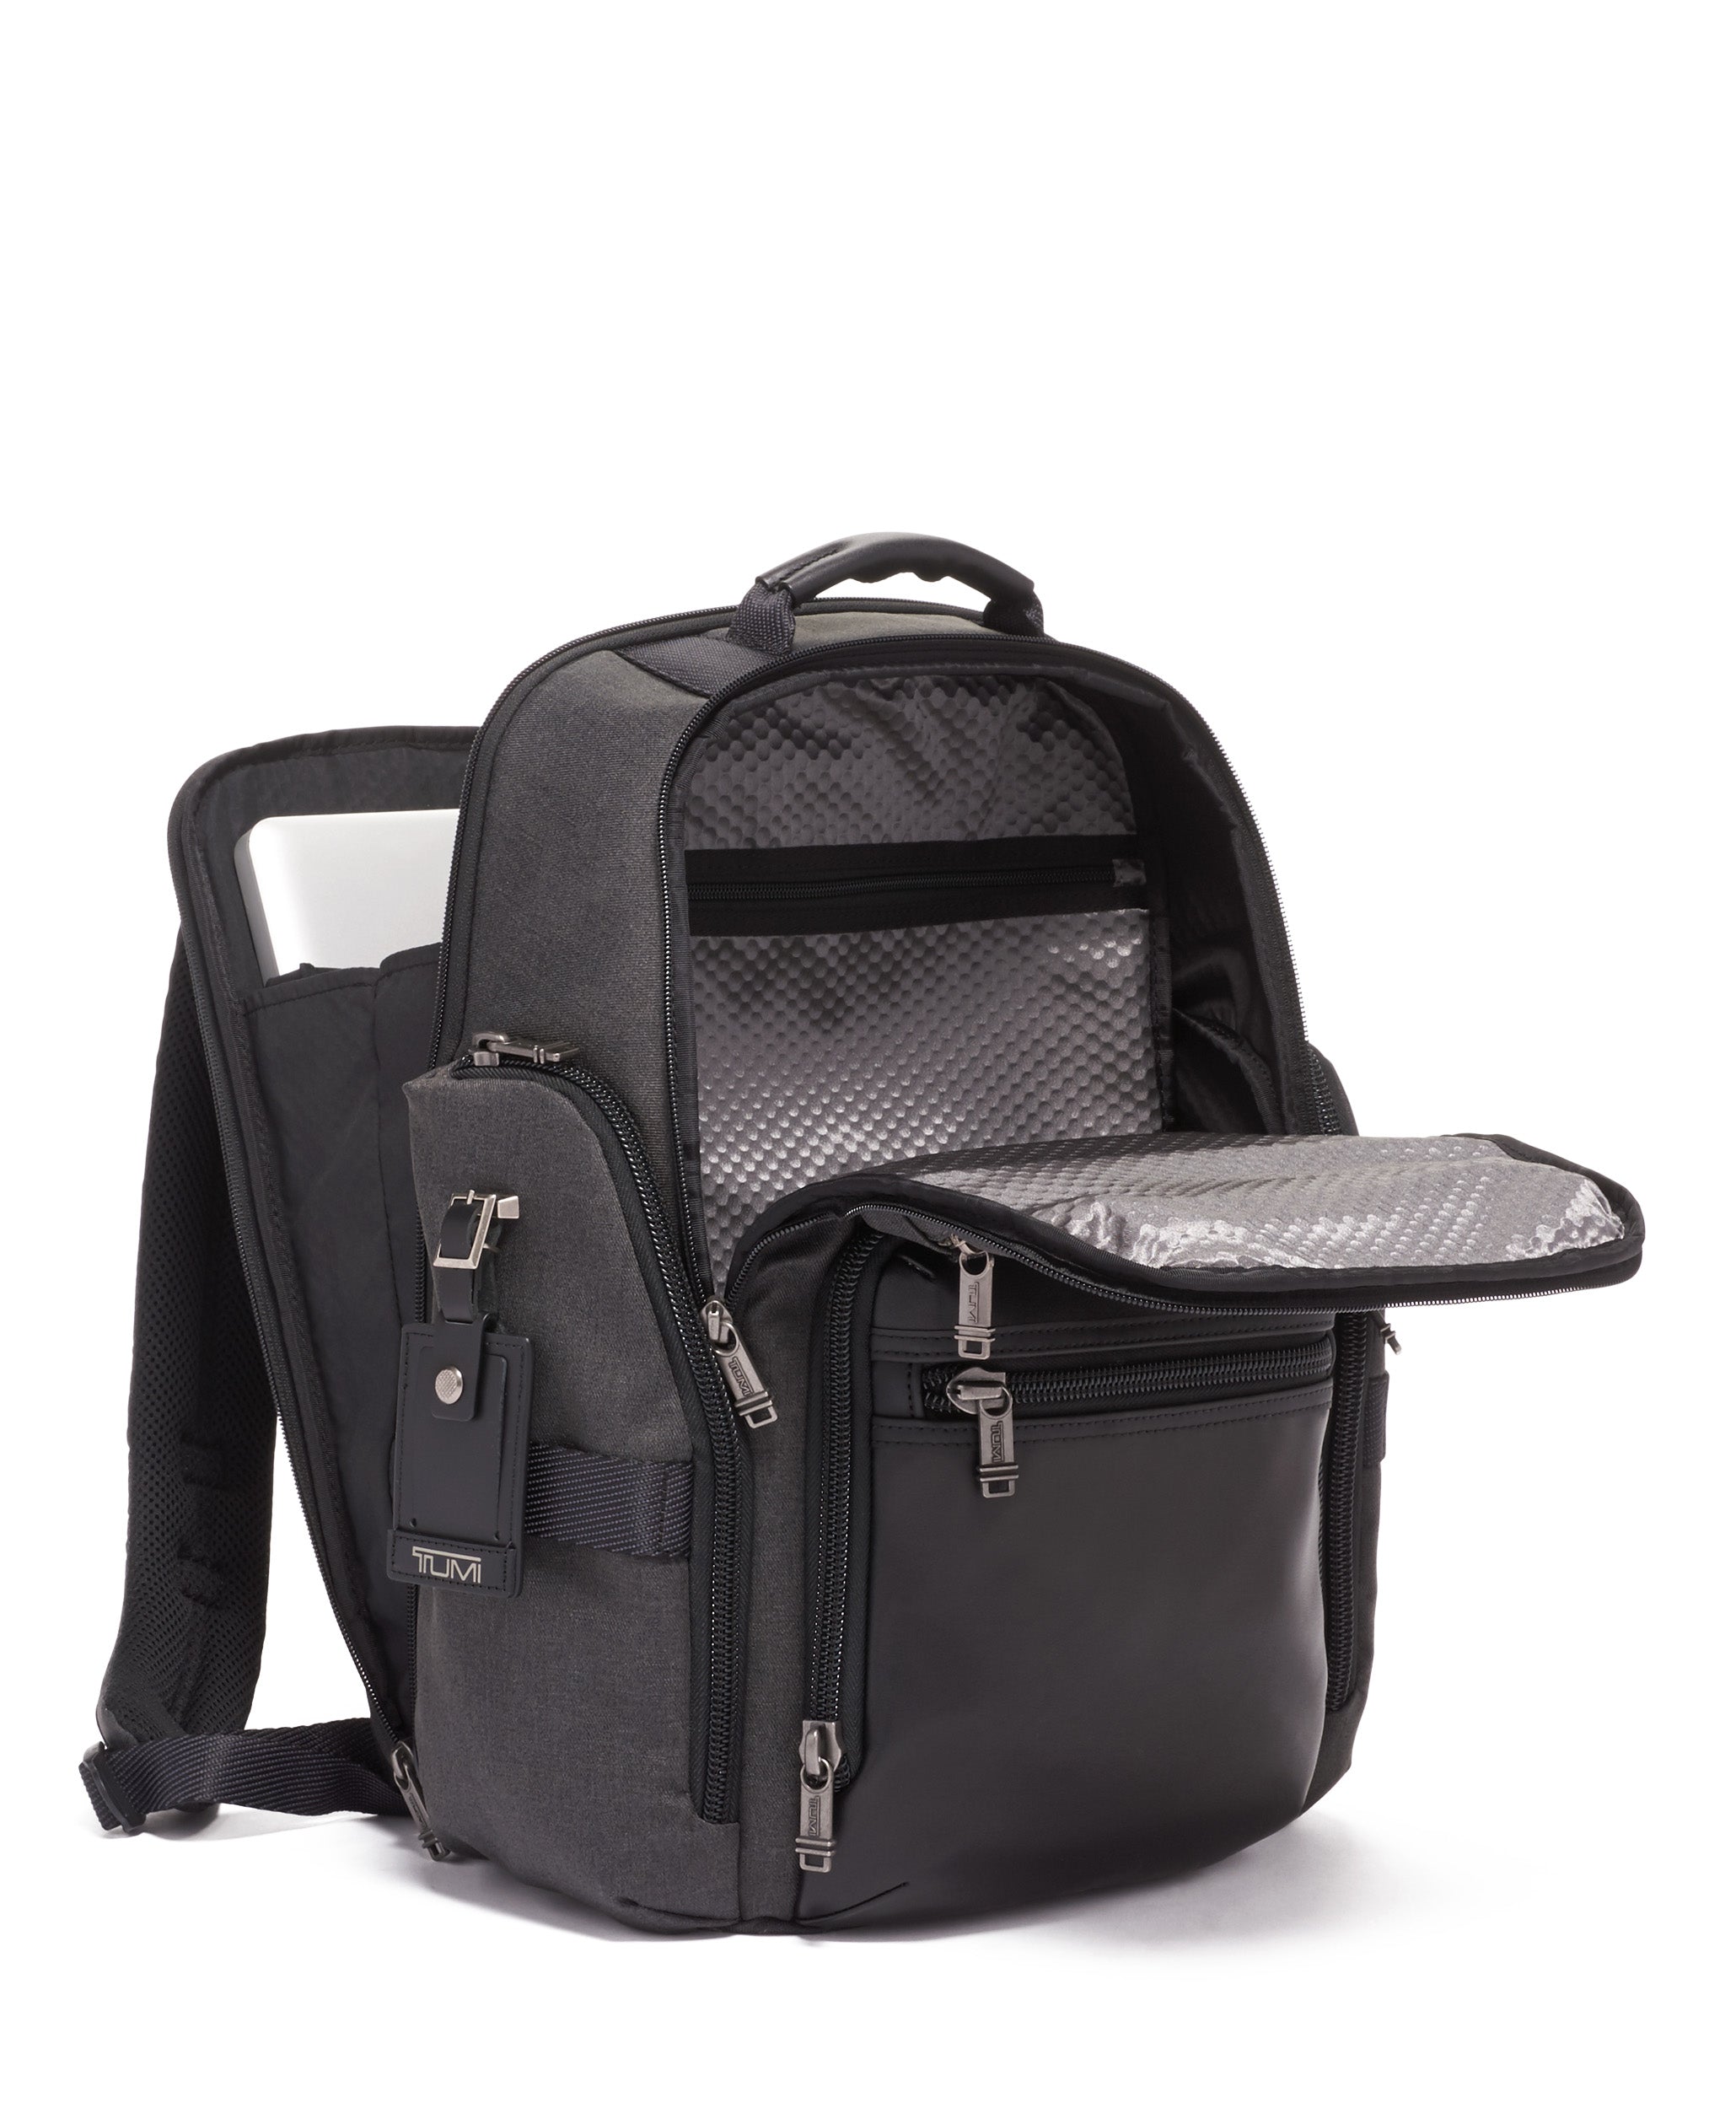 TUMI Alpha Sheppard Deluxe Backpack Luggage Online